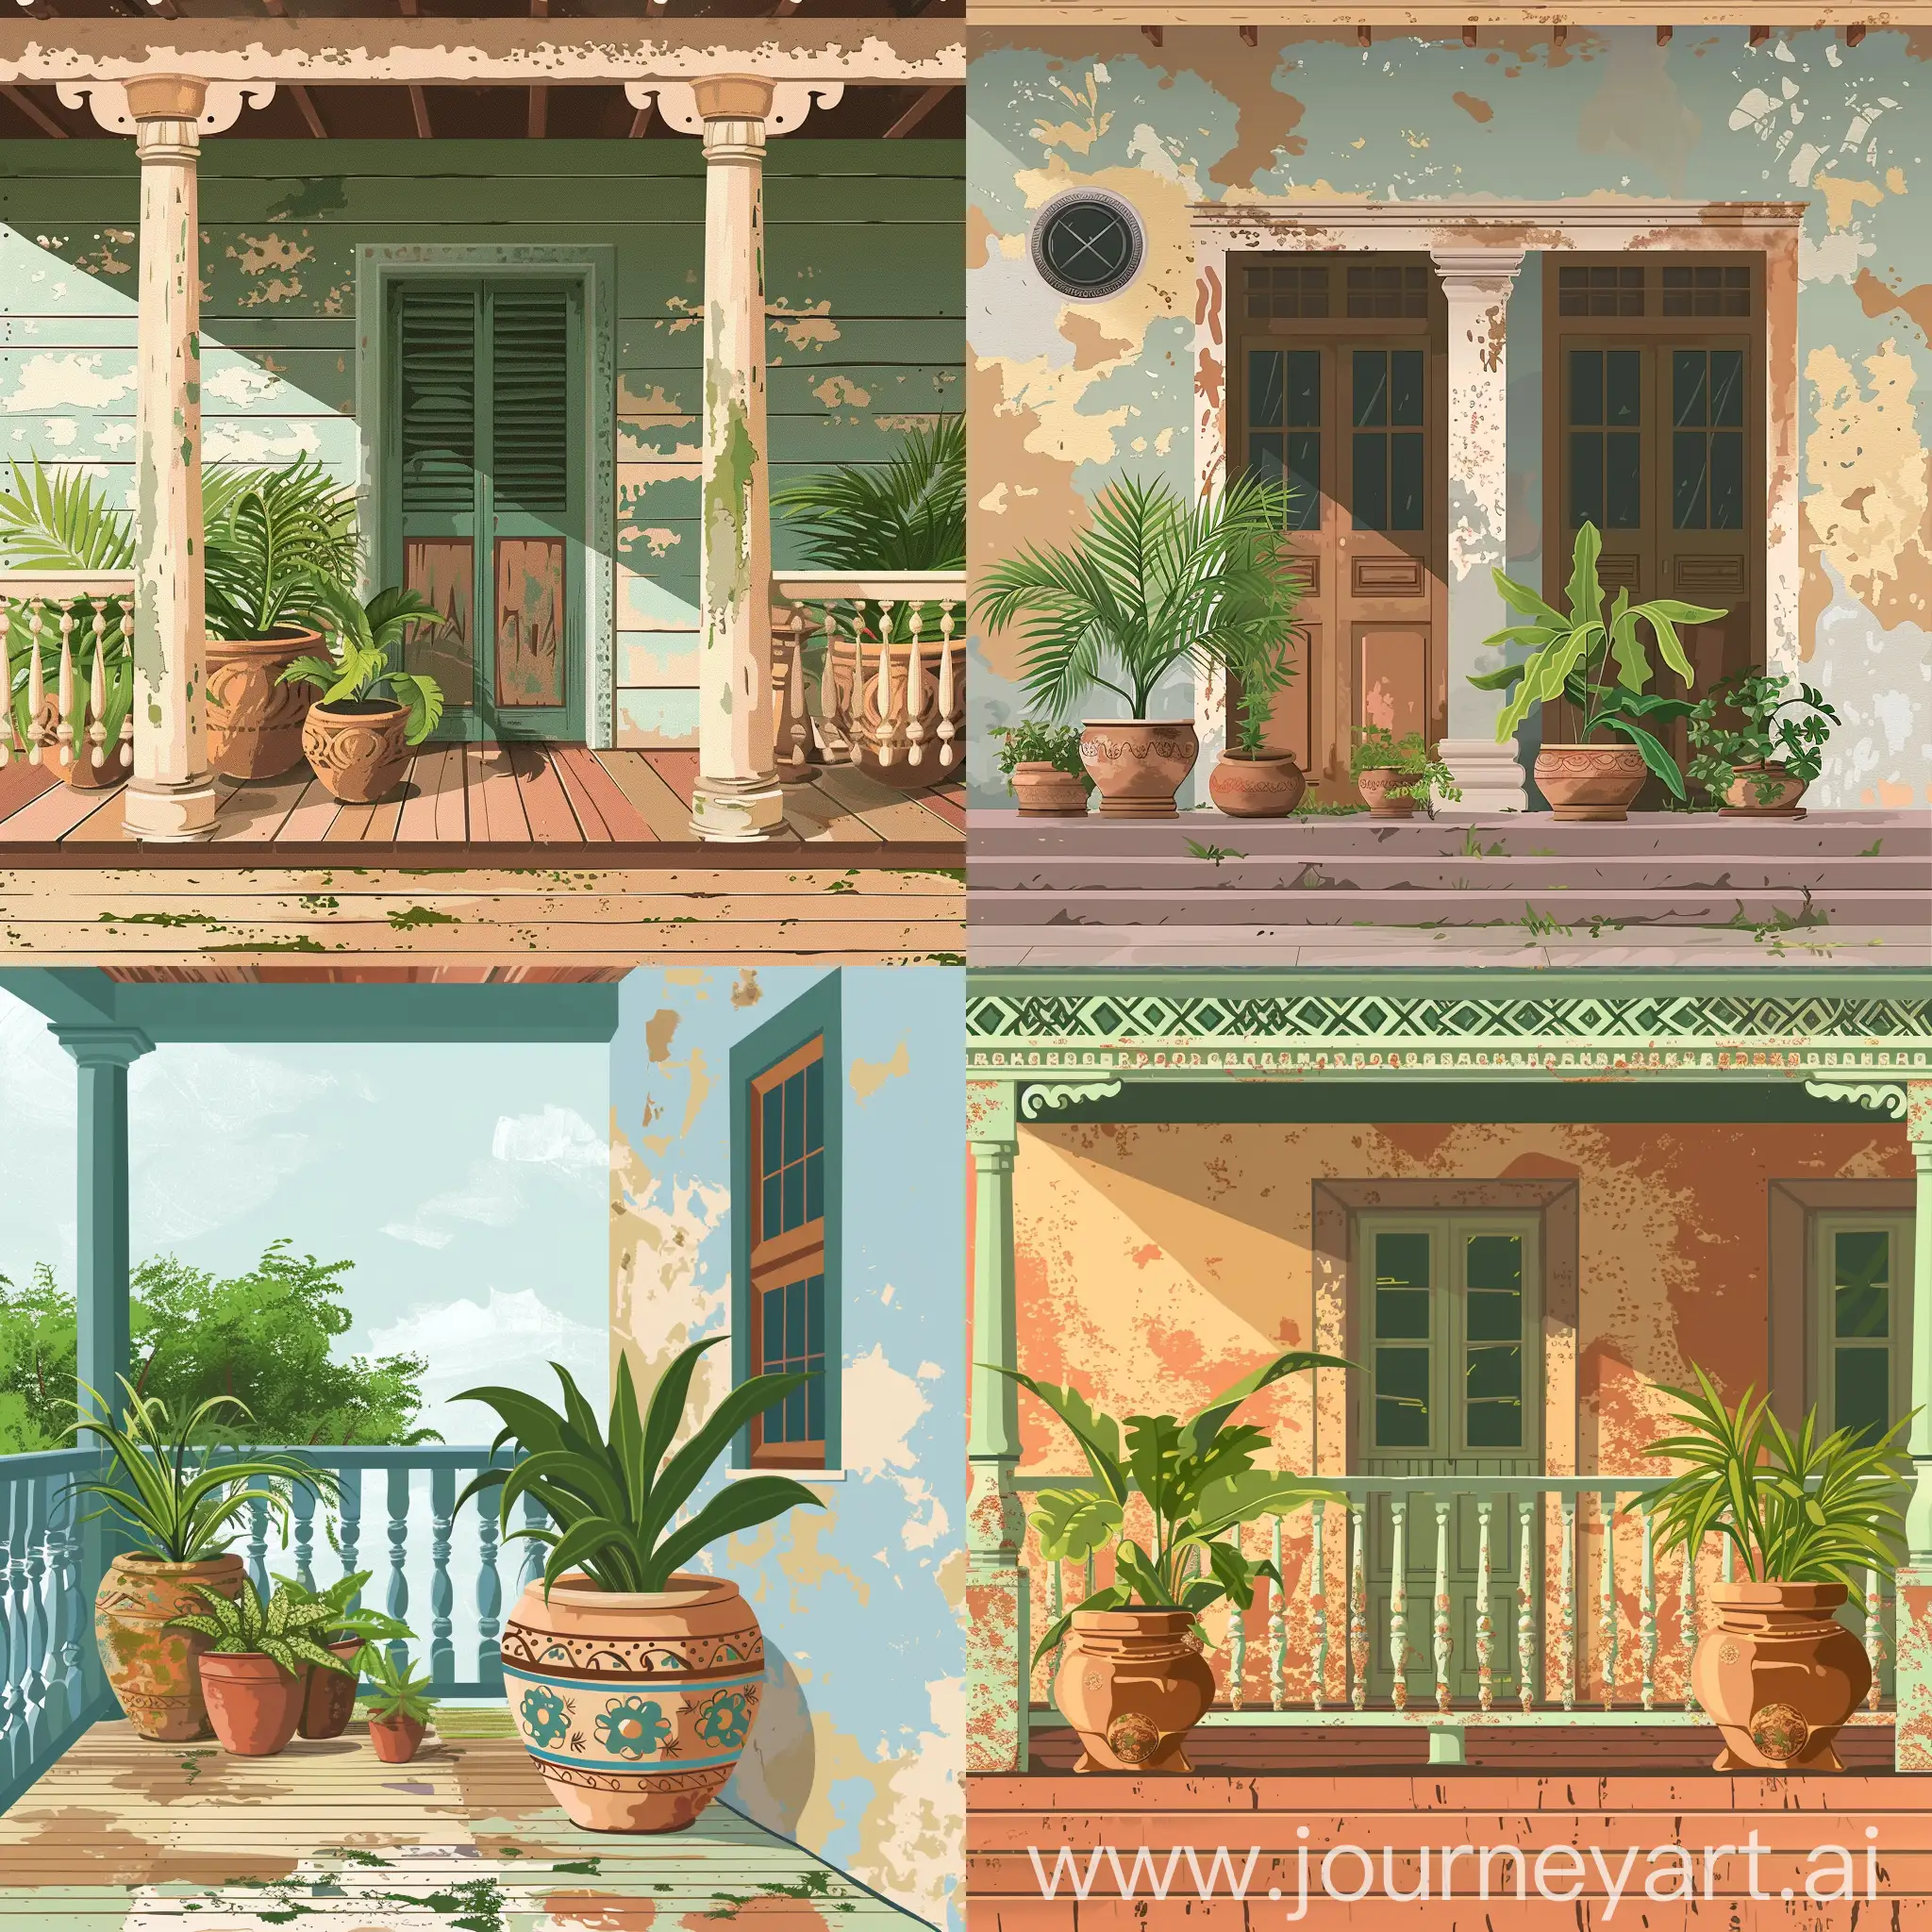 illustration of the front porch of a house in the style of vernacular architecture, hot climate, old house, chipped and peeling paint, plants in decorative clay pots, in high quality flat style